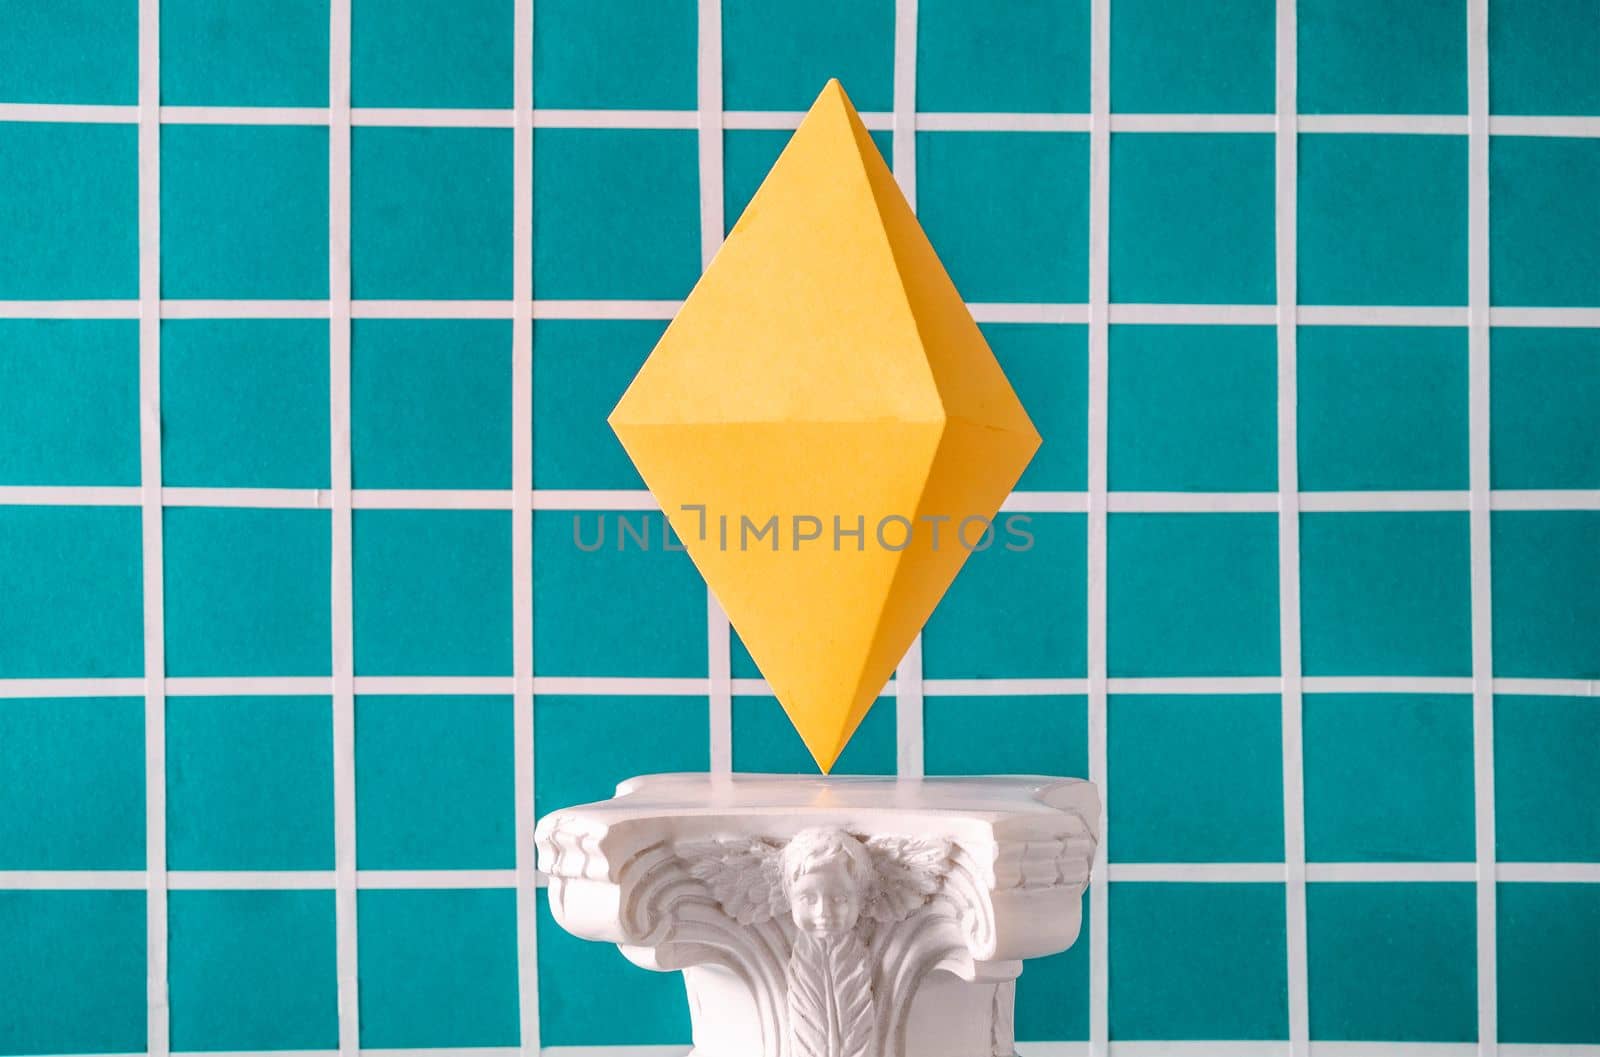 The symbol of the cryptocurrency Ethereum on an antique column in the style of vaporwave by sergii_gnatiuk